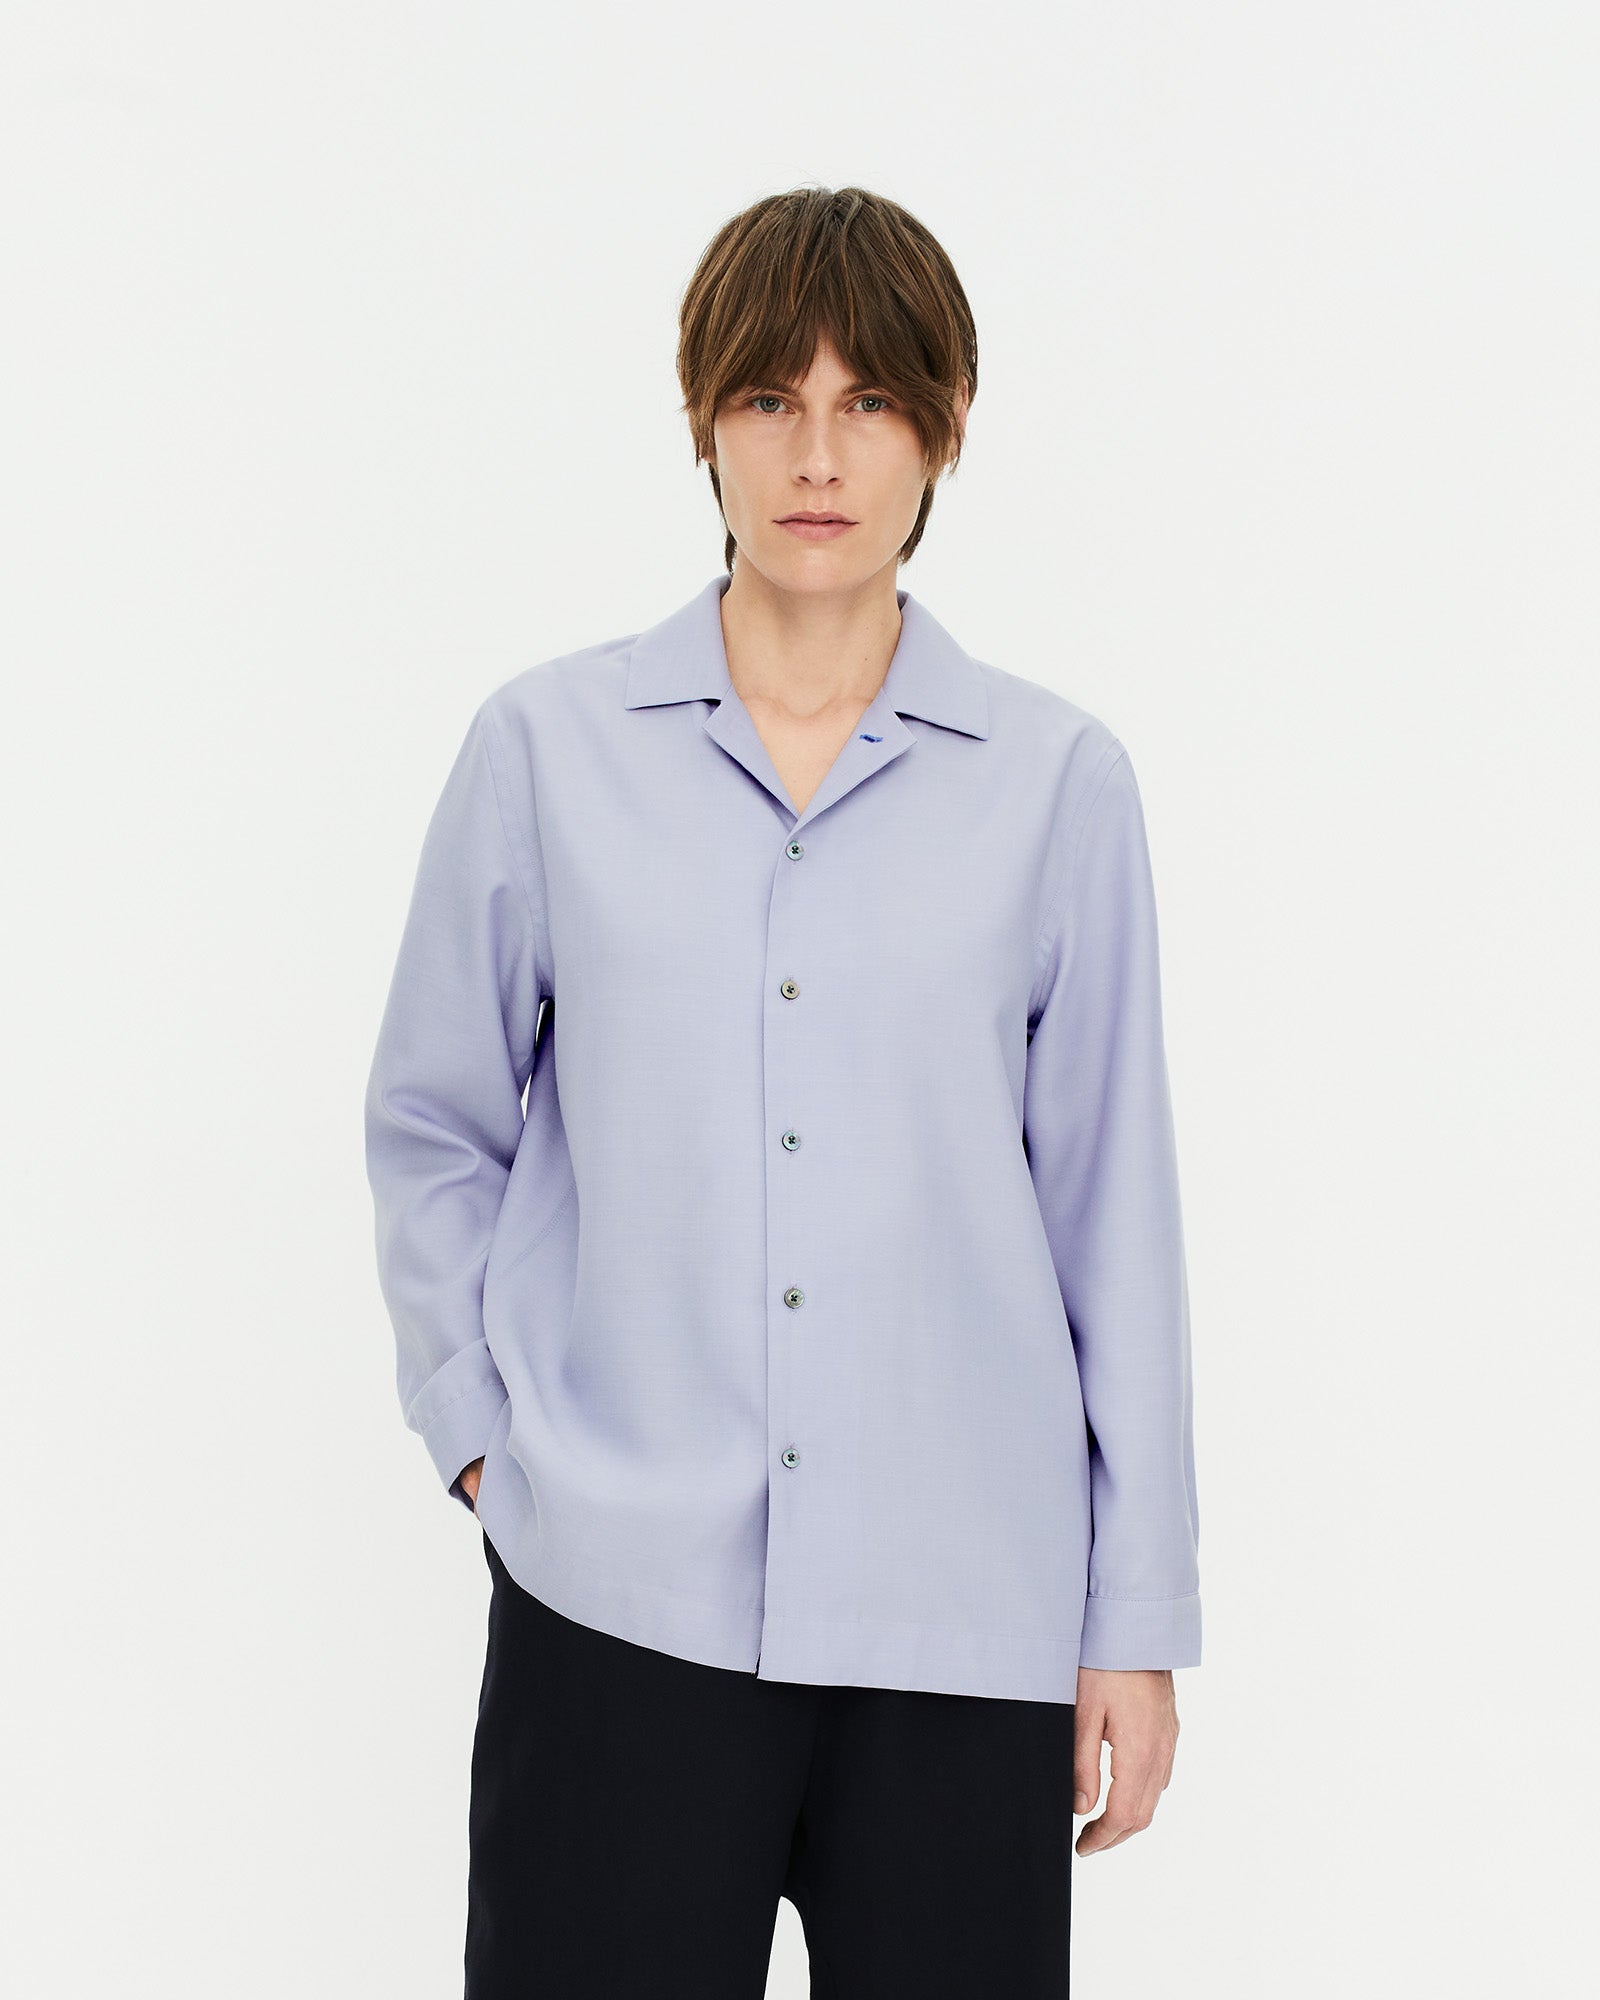 Unisex shirt with convertible collar